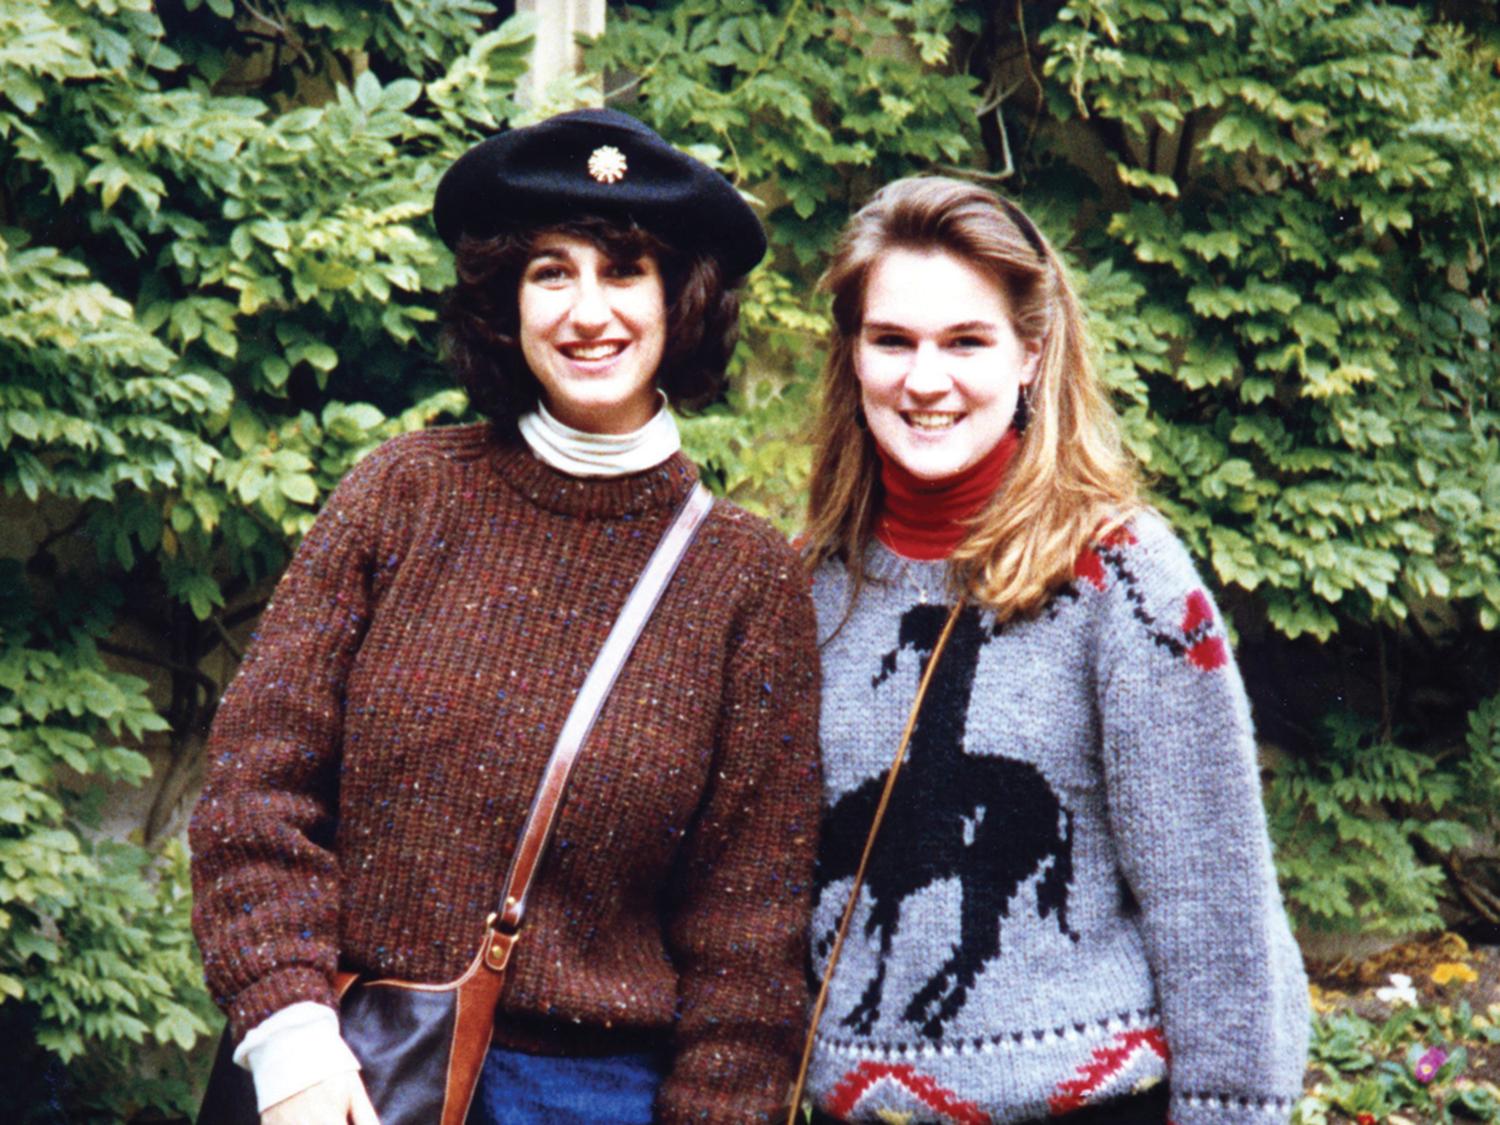 Colleen Brunner ’90 and Lynne Hartunian ’89, Oswego students lost in the Pan Am 103 bombing in 1988